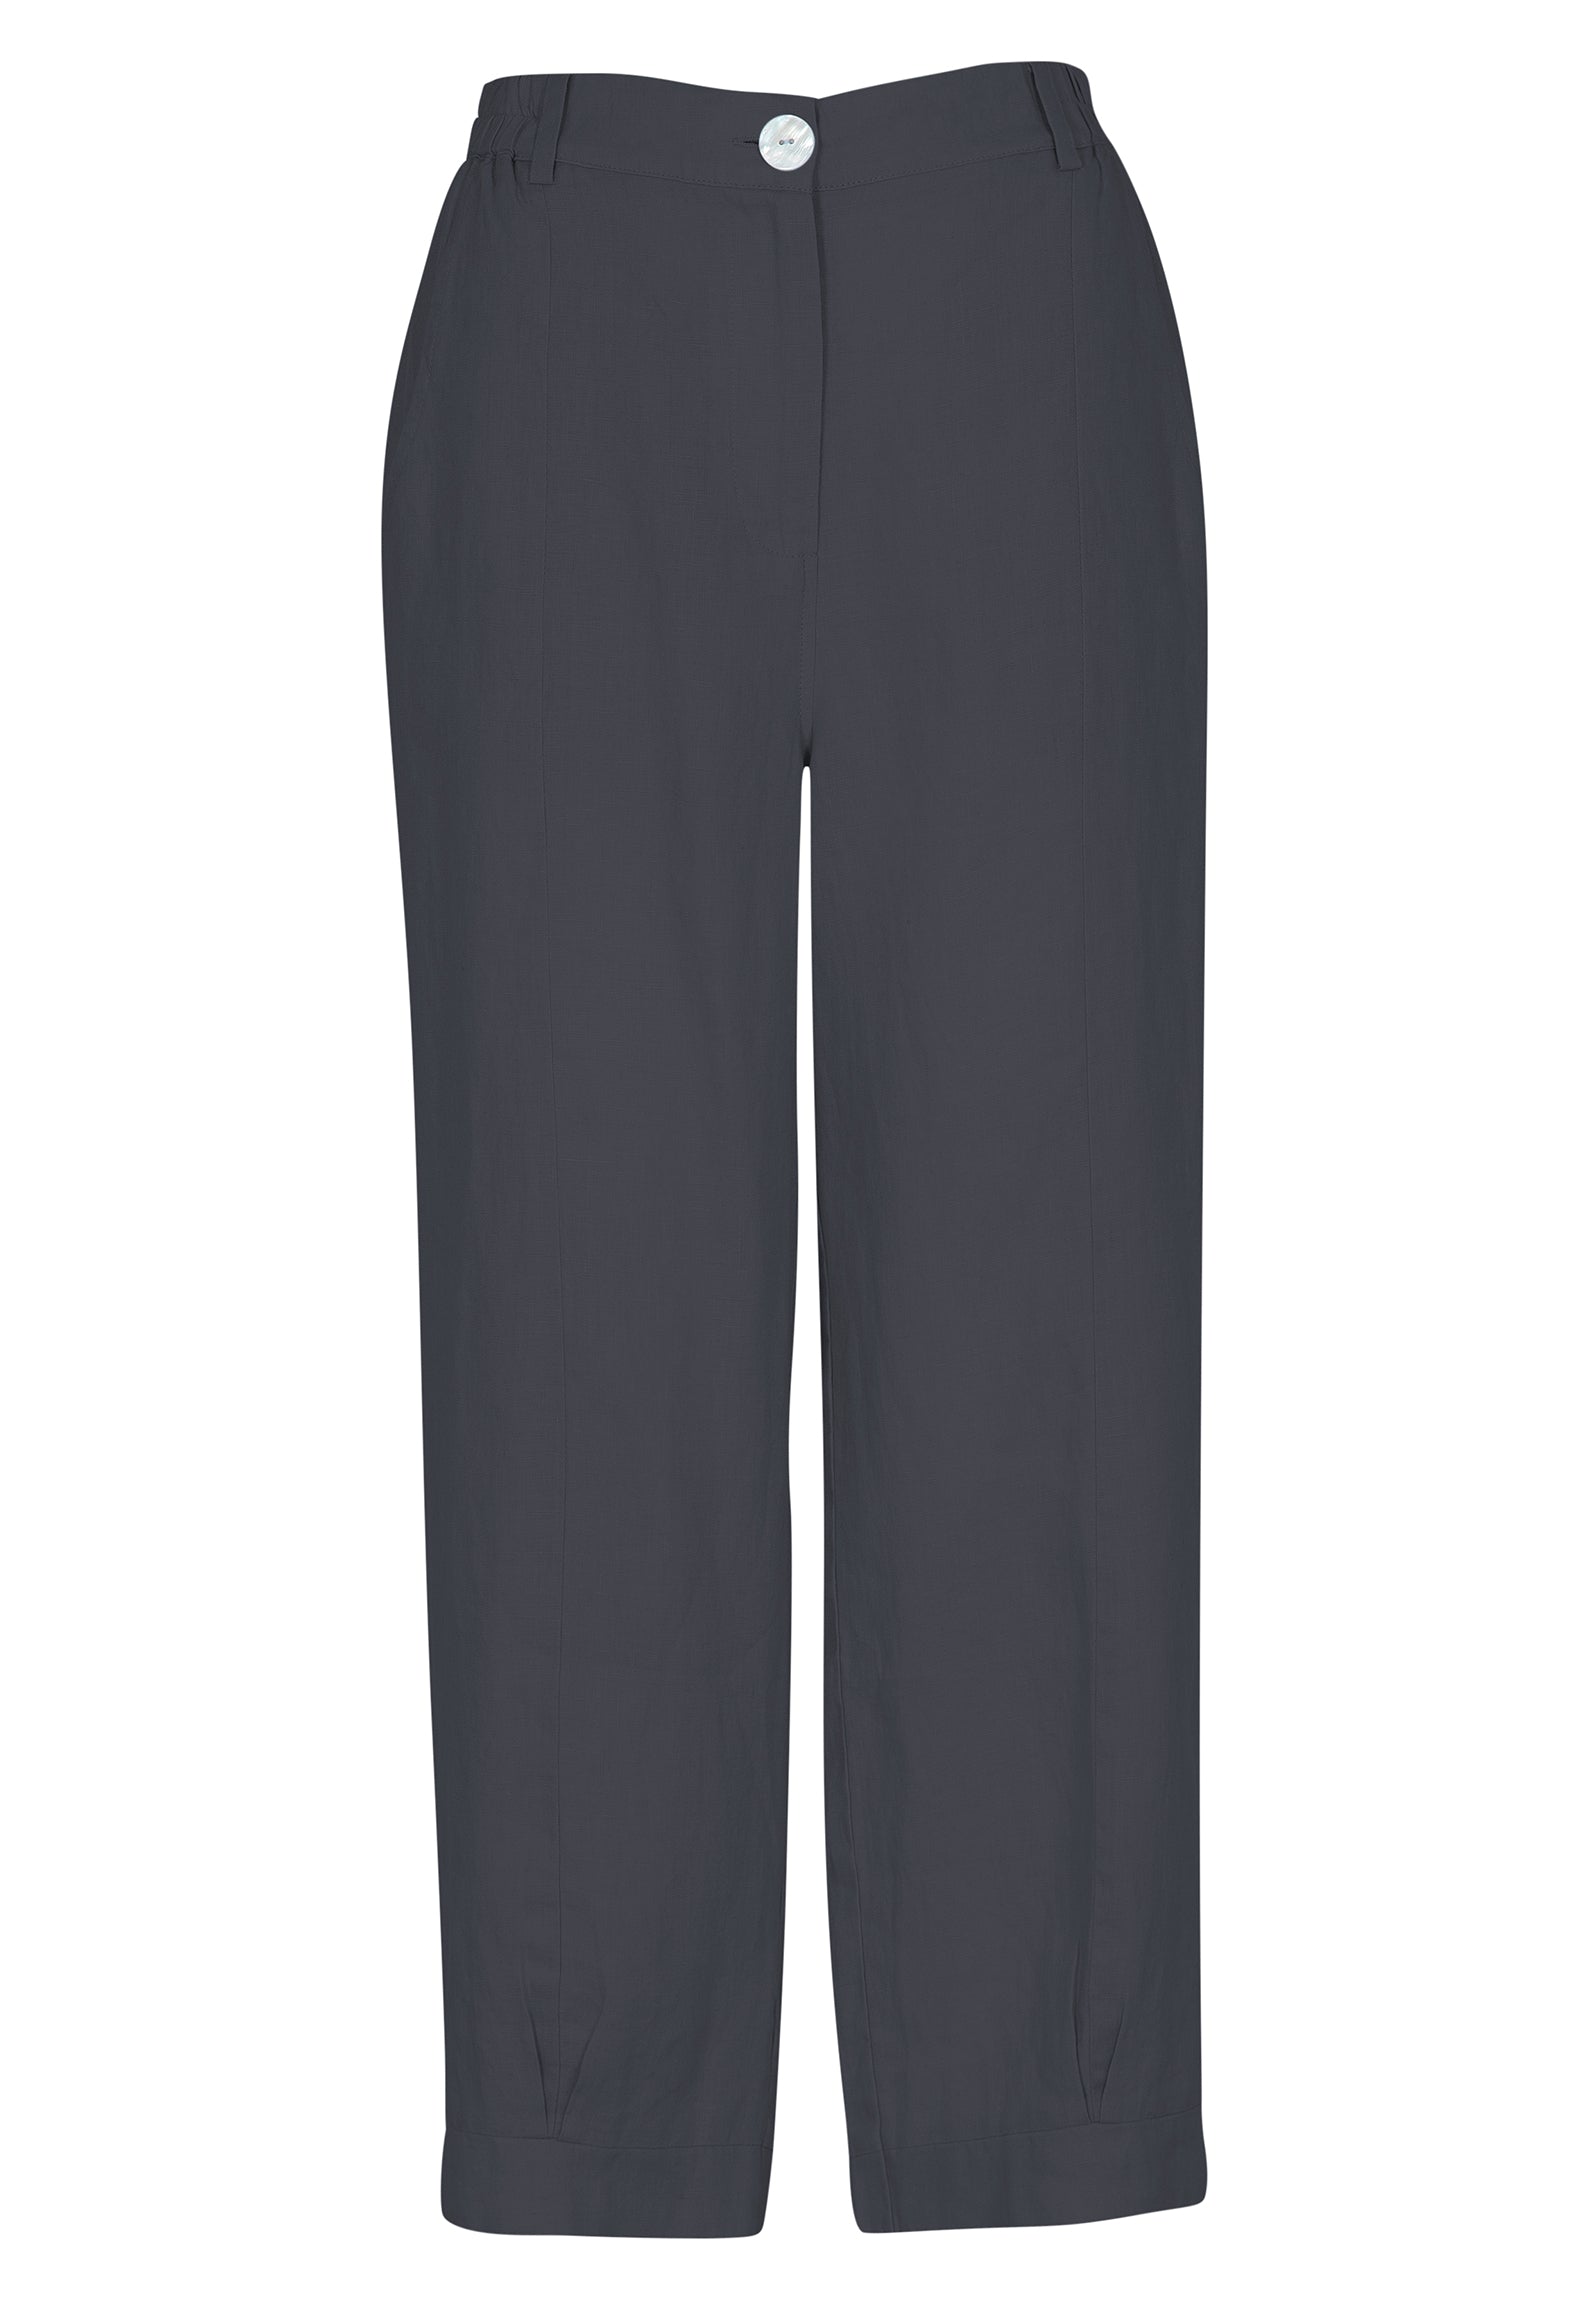 Hadley Pant - Charcoal-Pants-By RIDLEY-The Bay Room